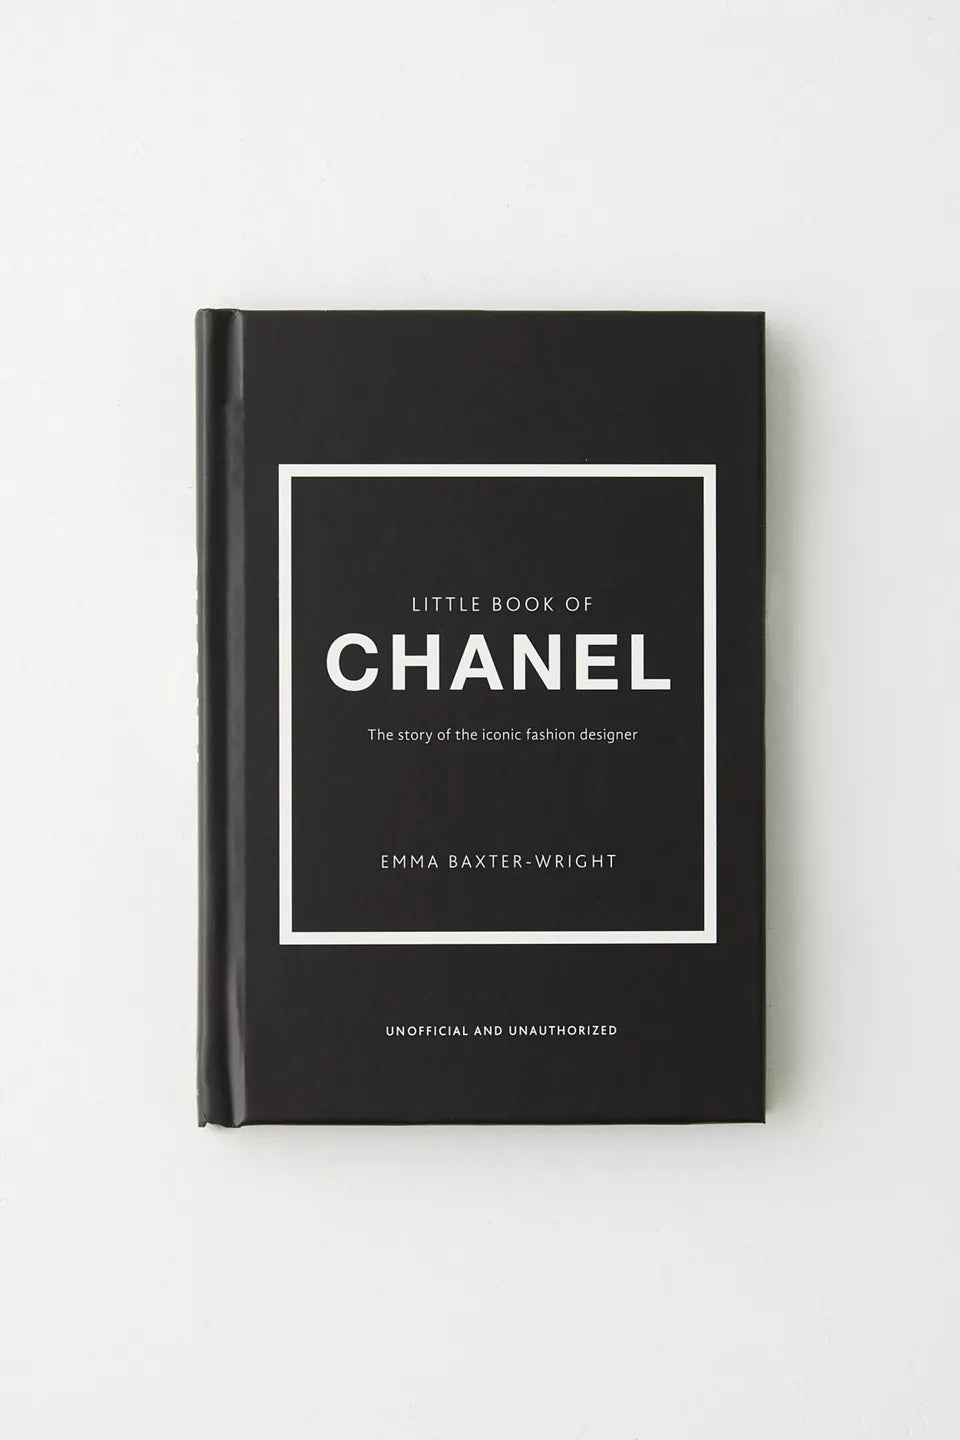 Little Book of Chanel: The Story of the Iconic Fashion House